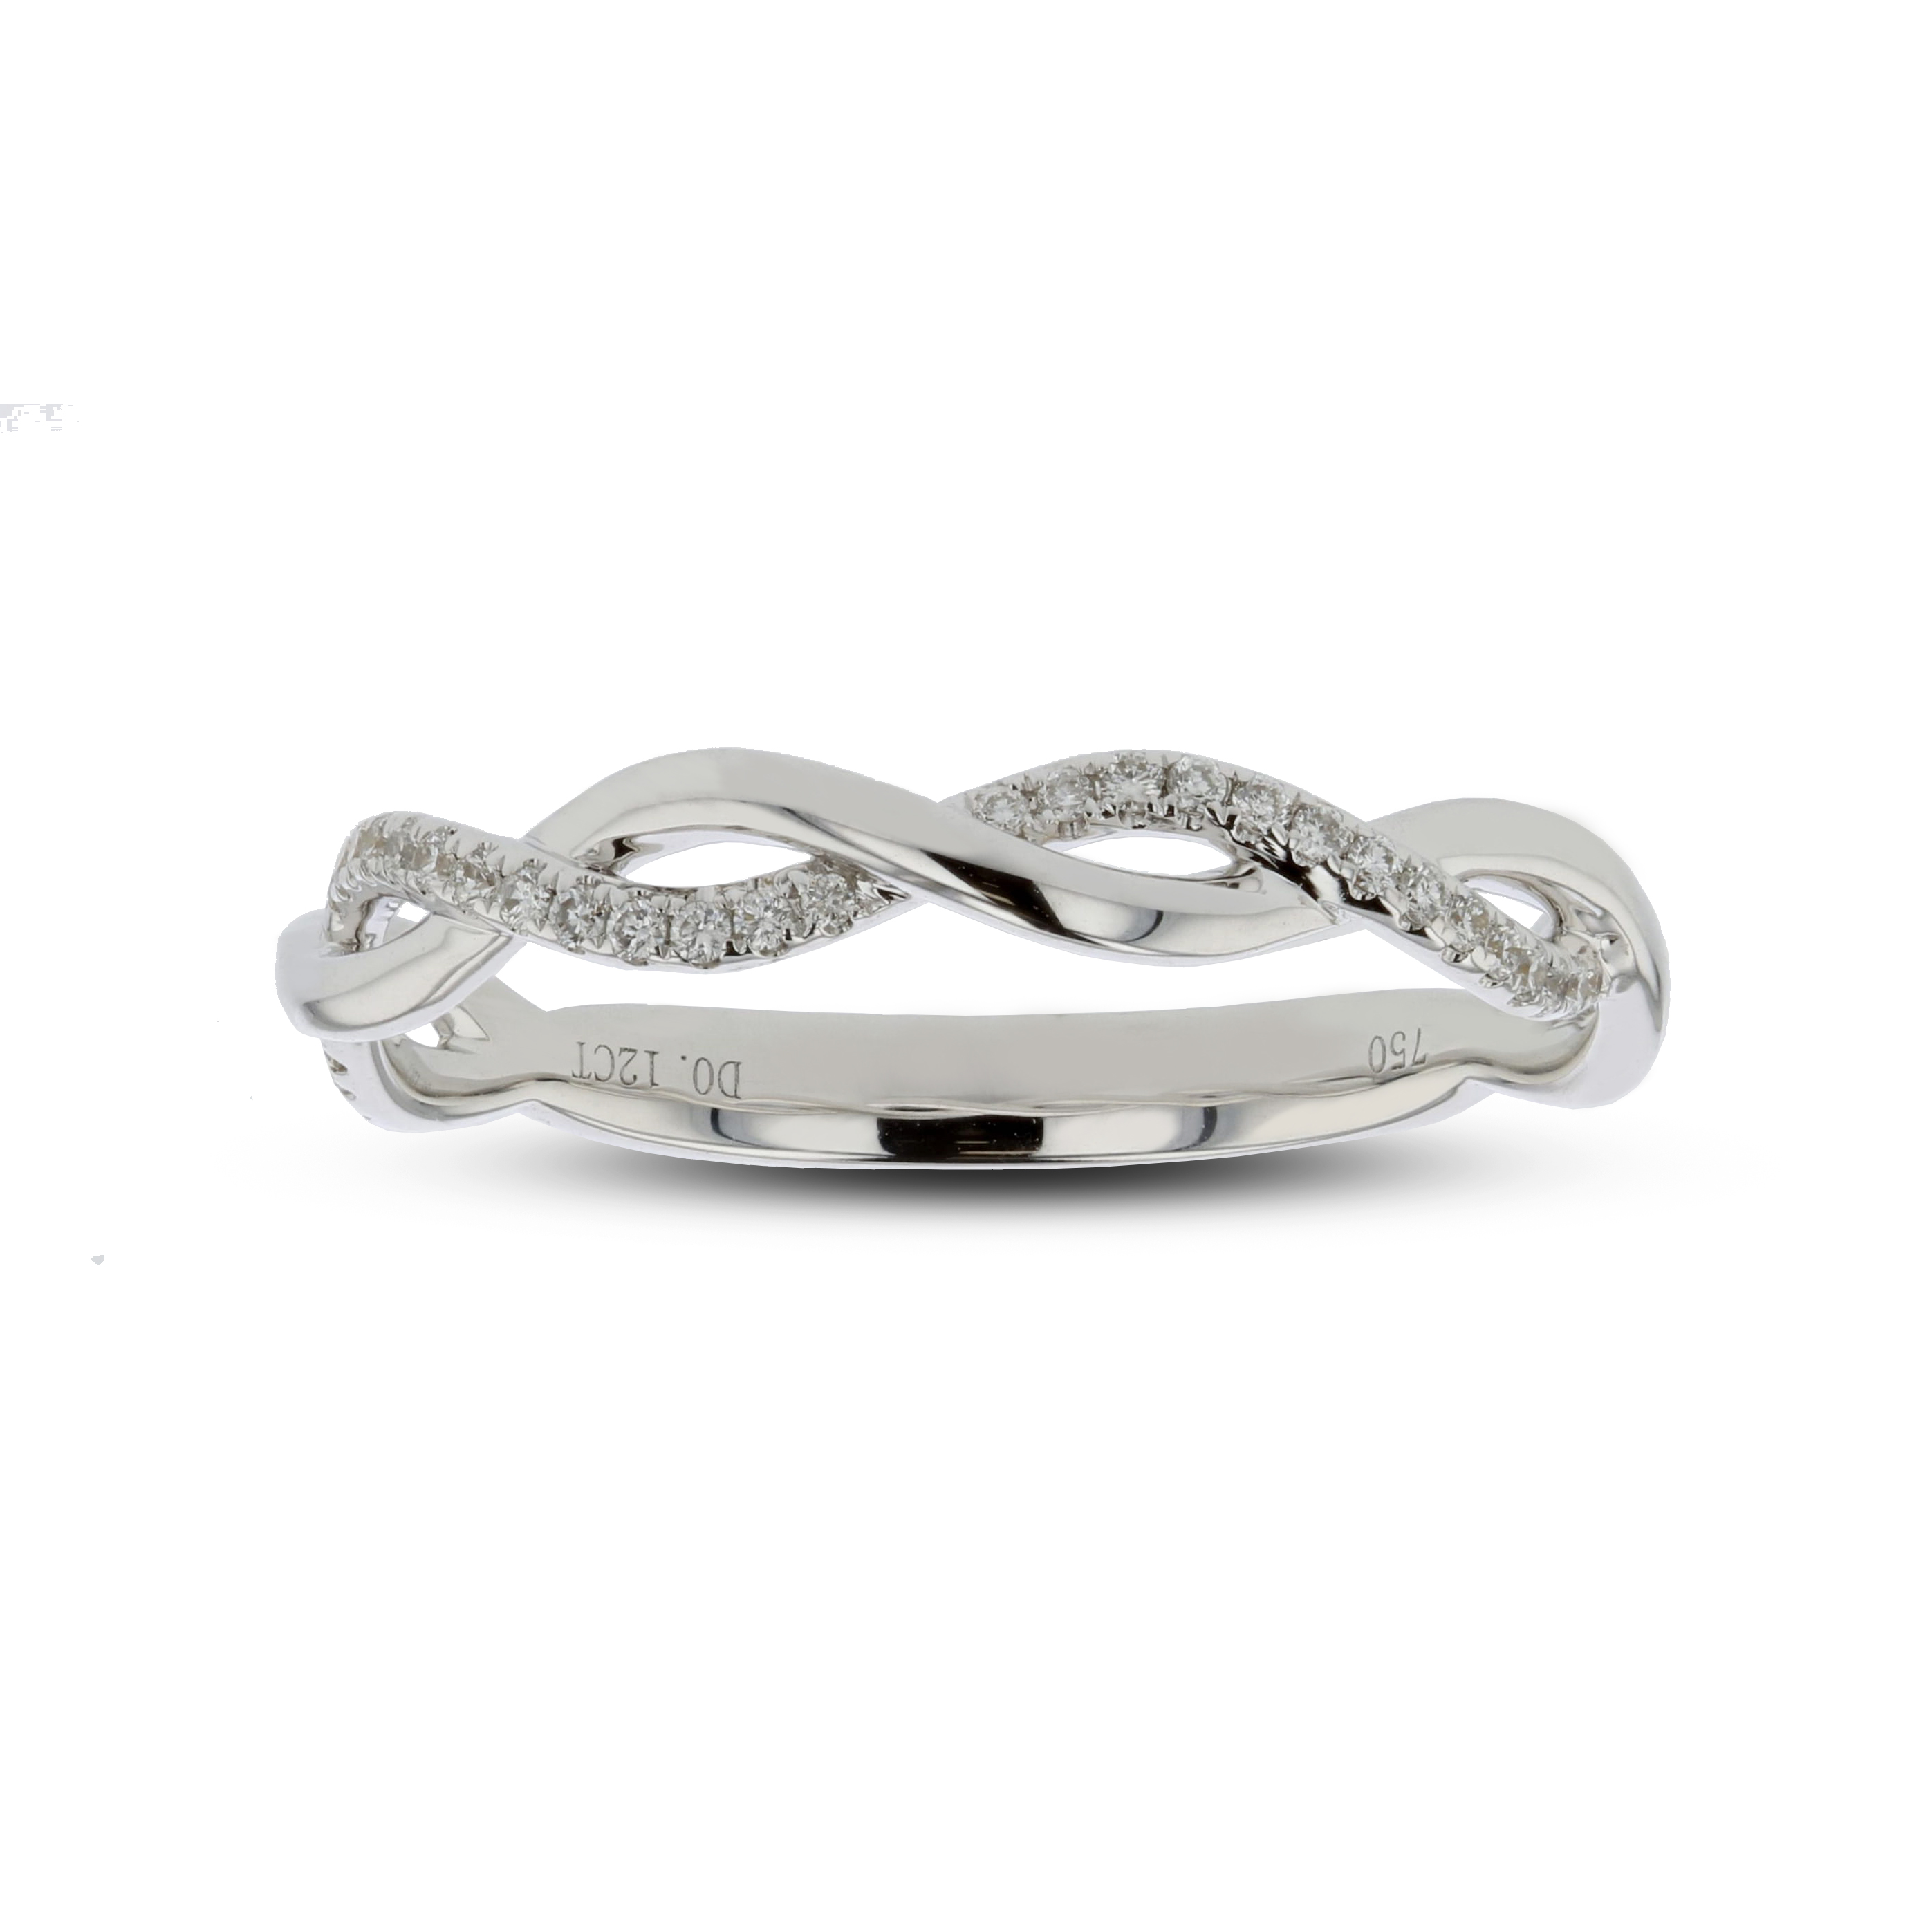 View 0.12ctw Diamond Infinity Band in 18k White Gold